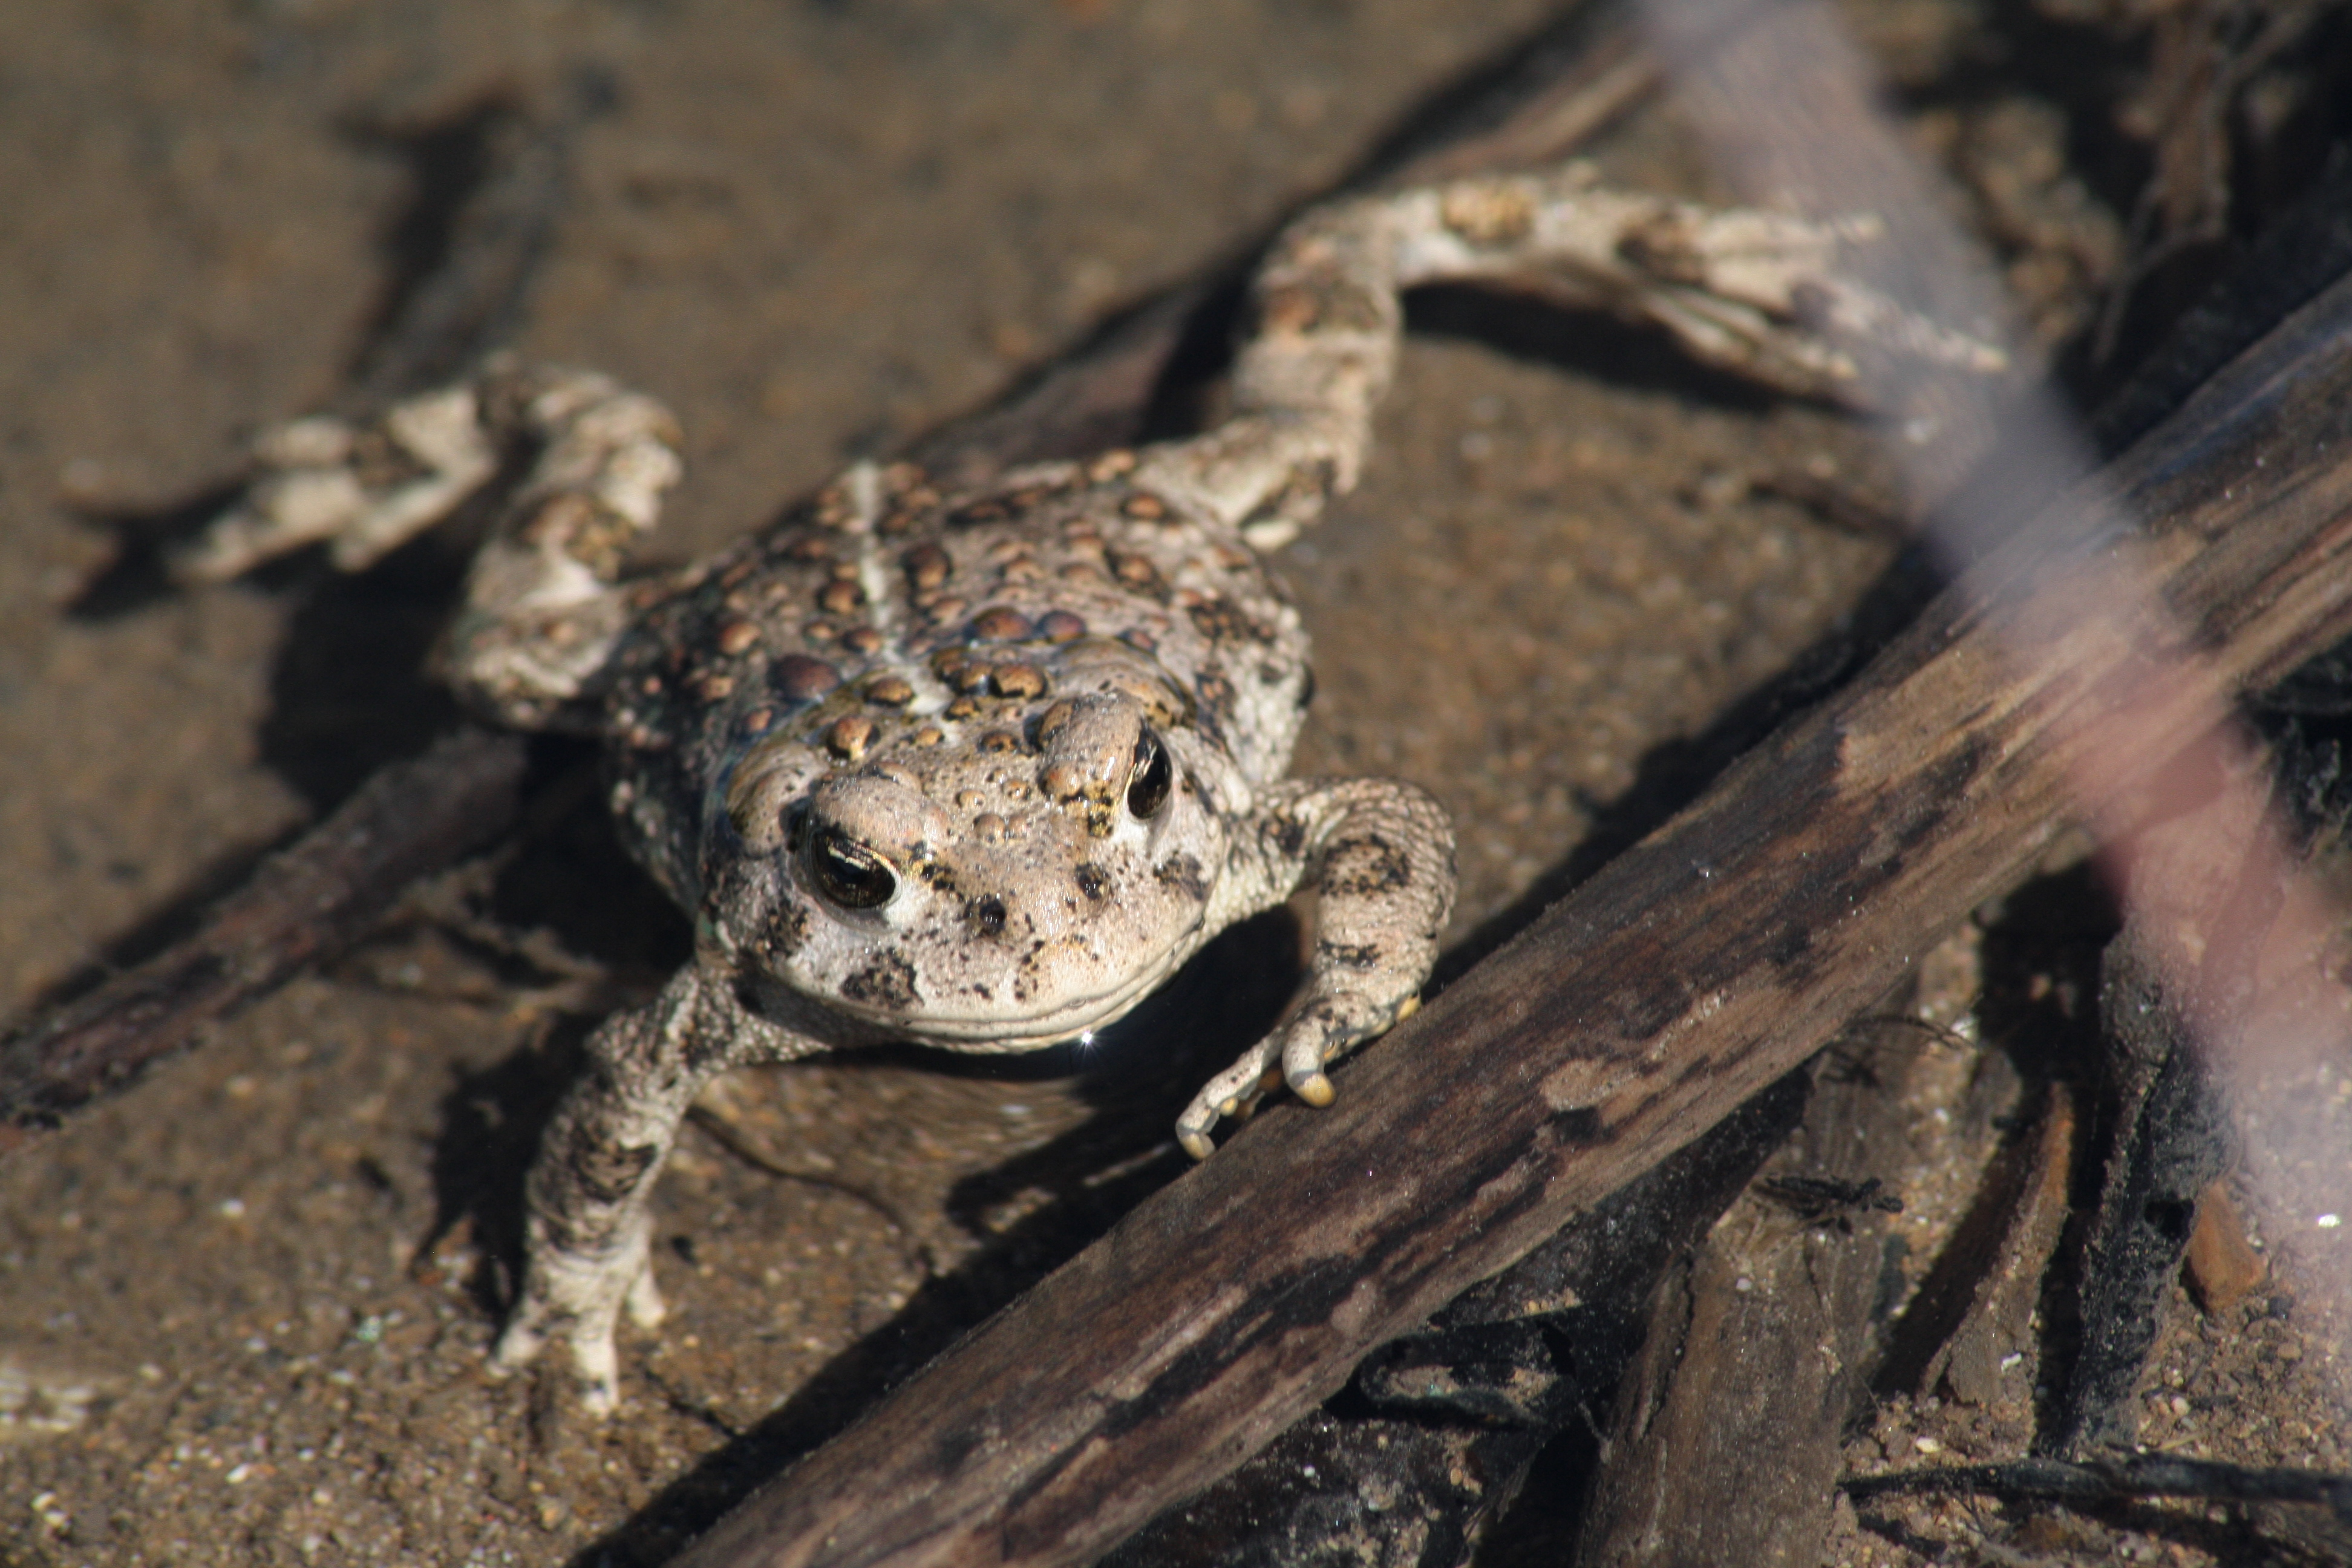 A rare Wyoming toad